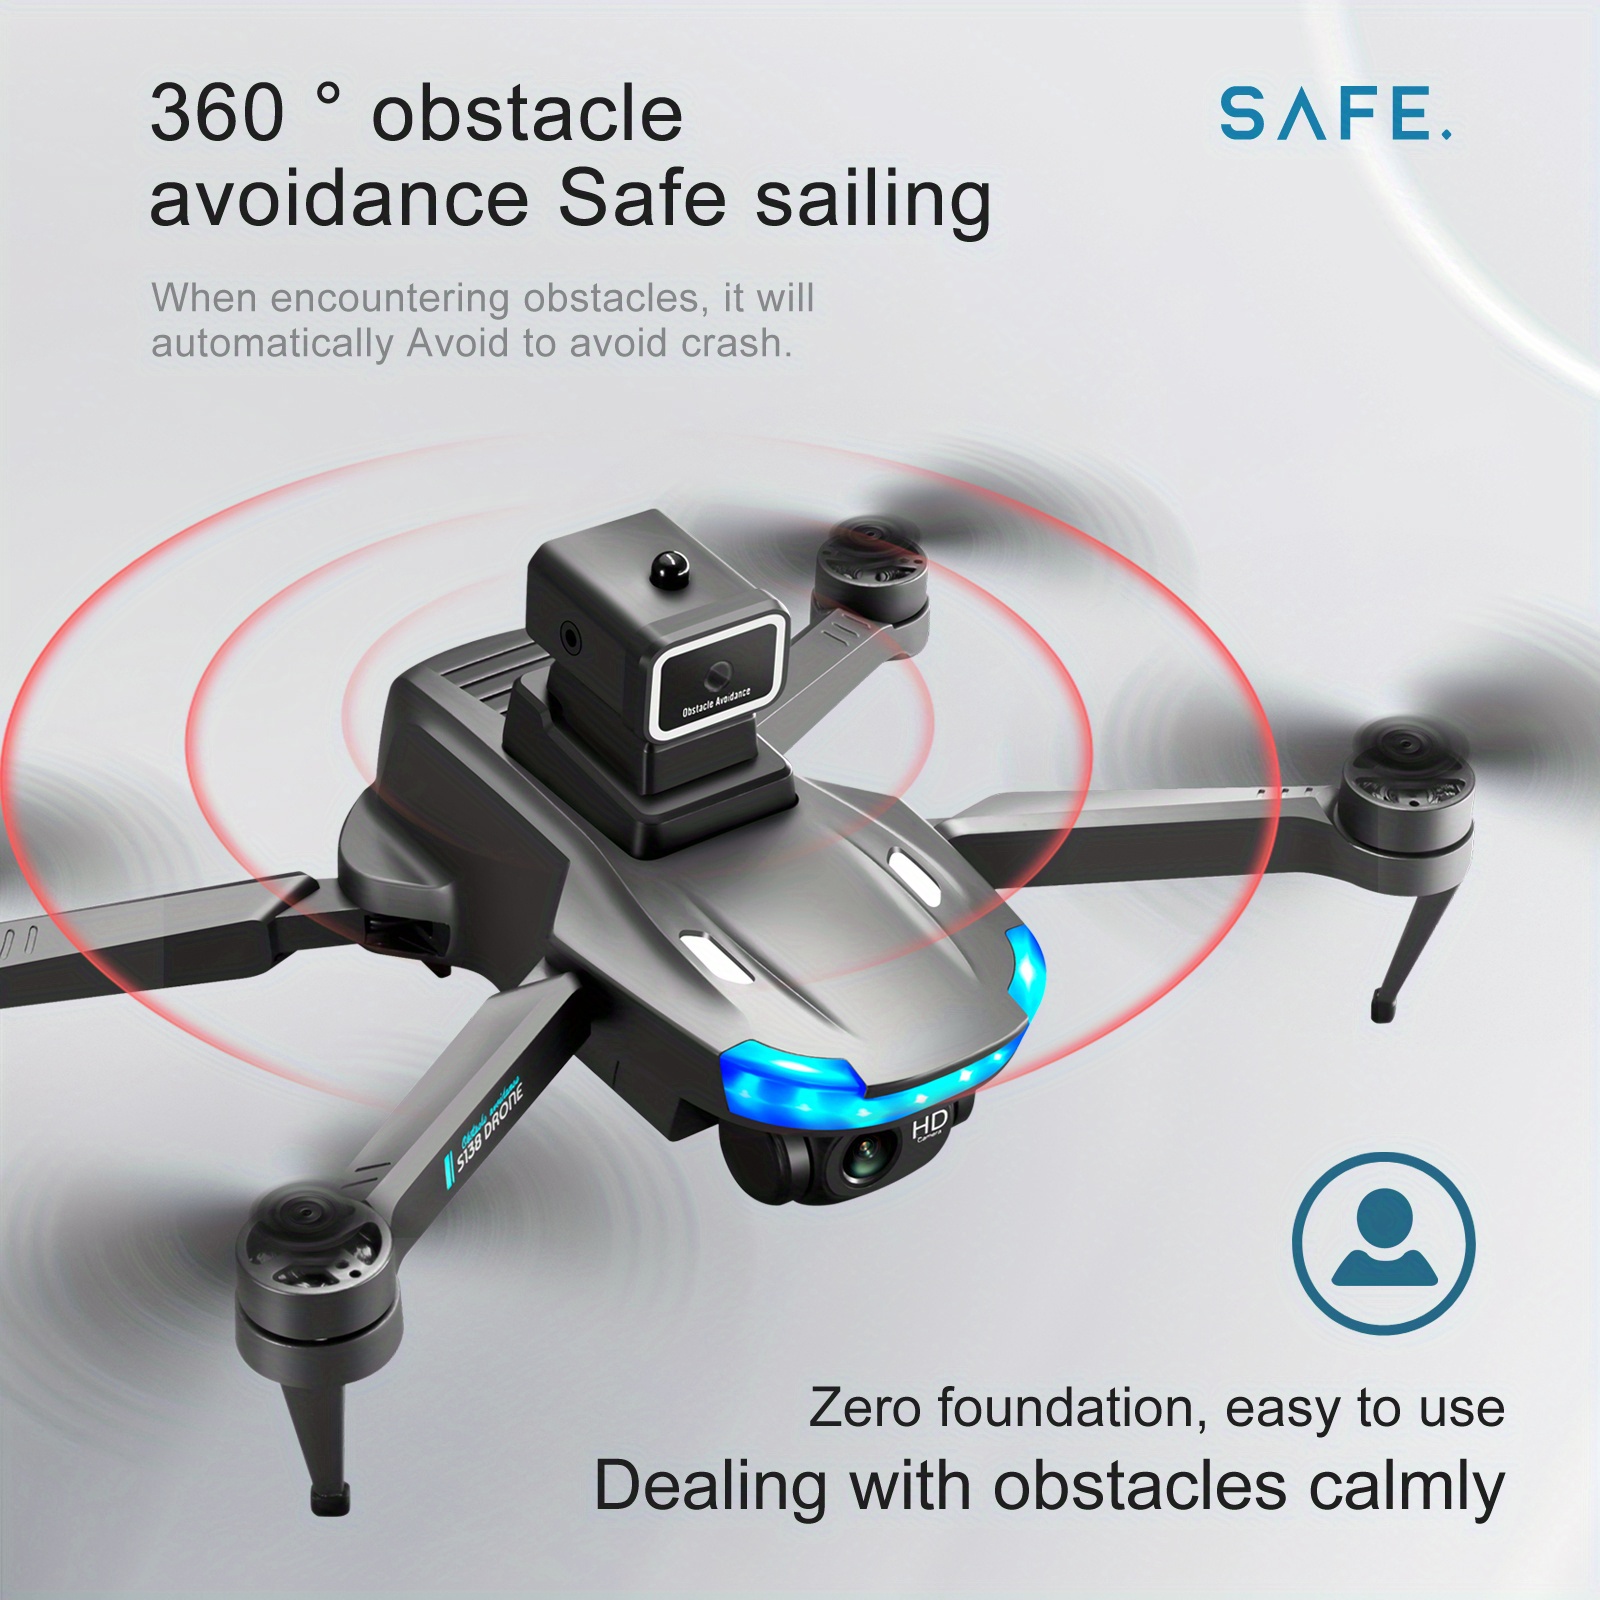 s138 brushless optical flow remote control drone with hd dual camera 1 3 batteries optical flow positioning esc camera brushless motor headless mode 360 intelligent obstacle avoidance wifi fpv details 4